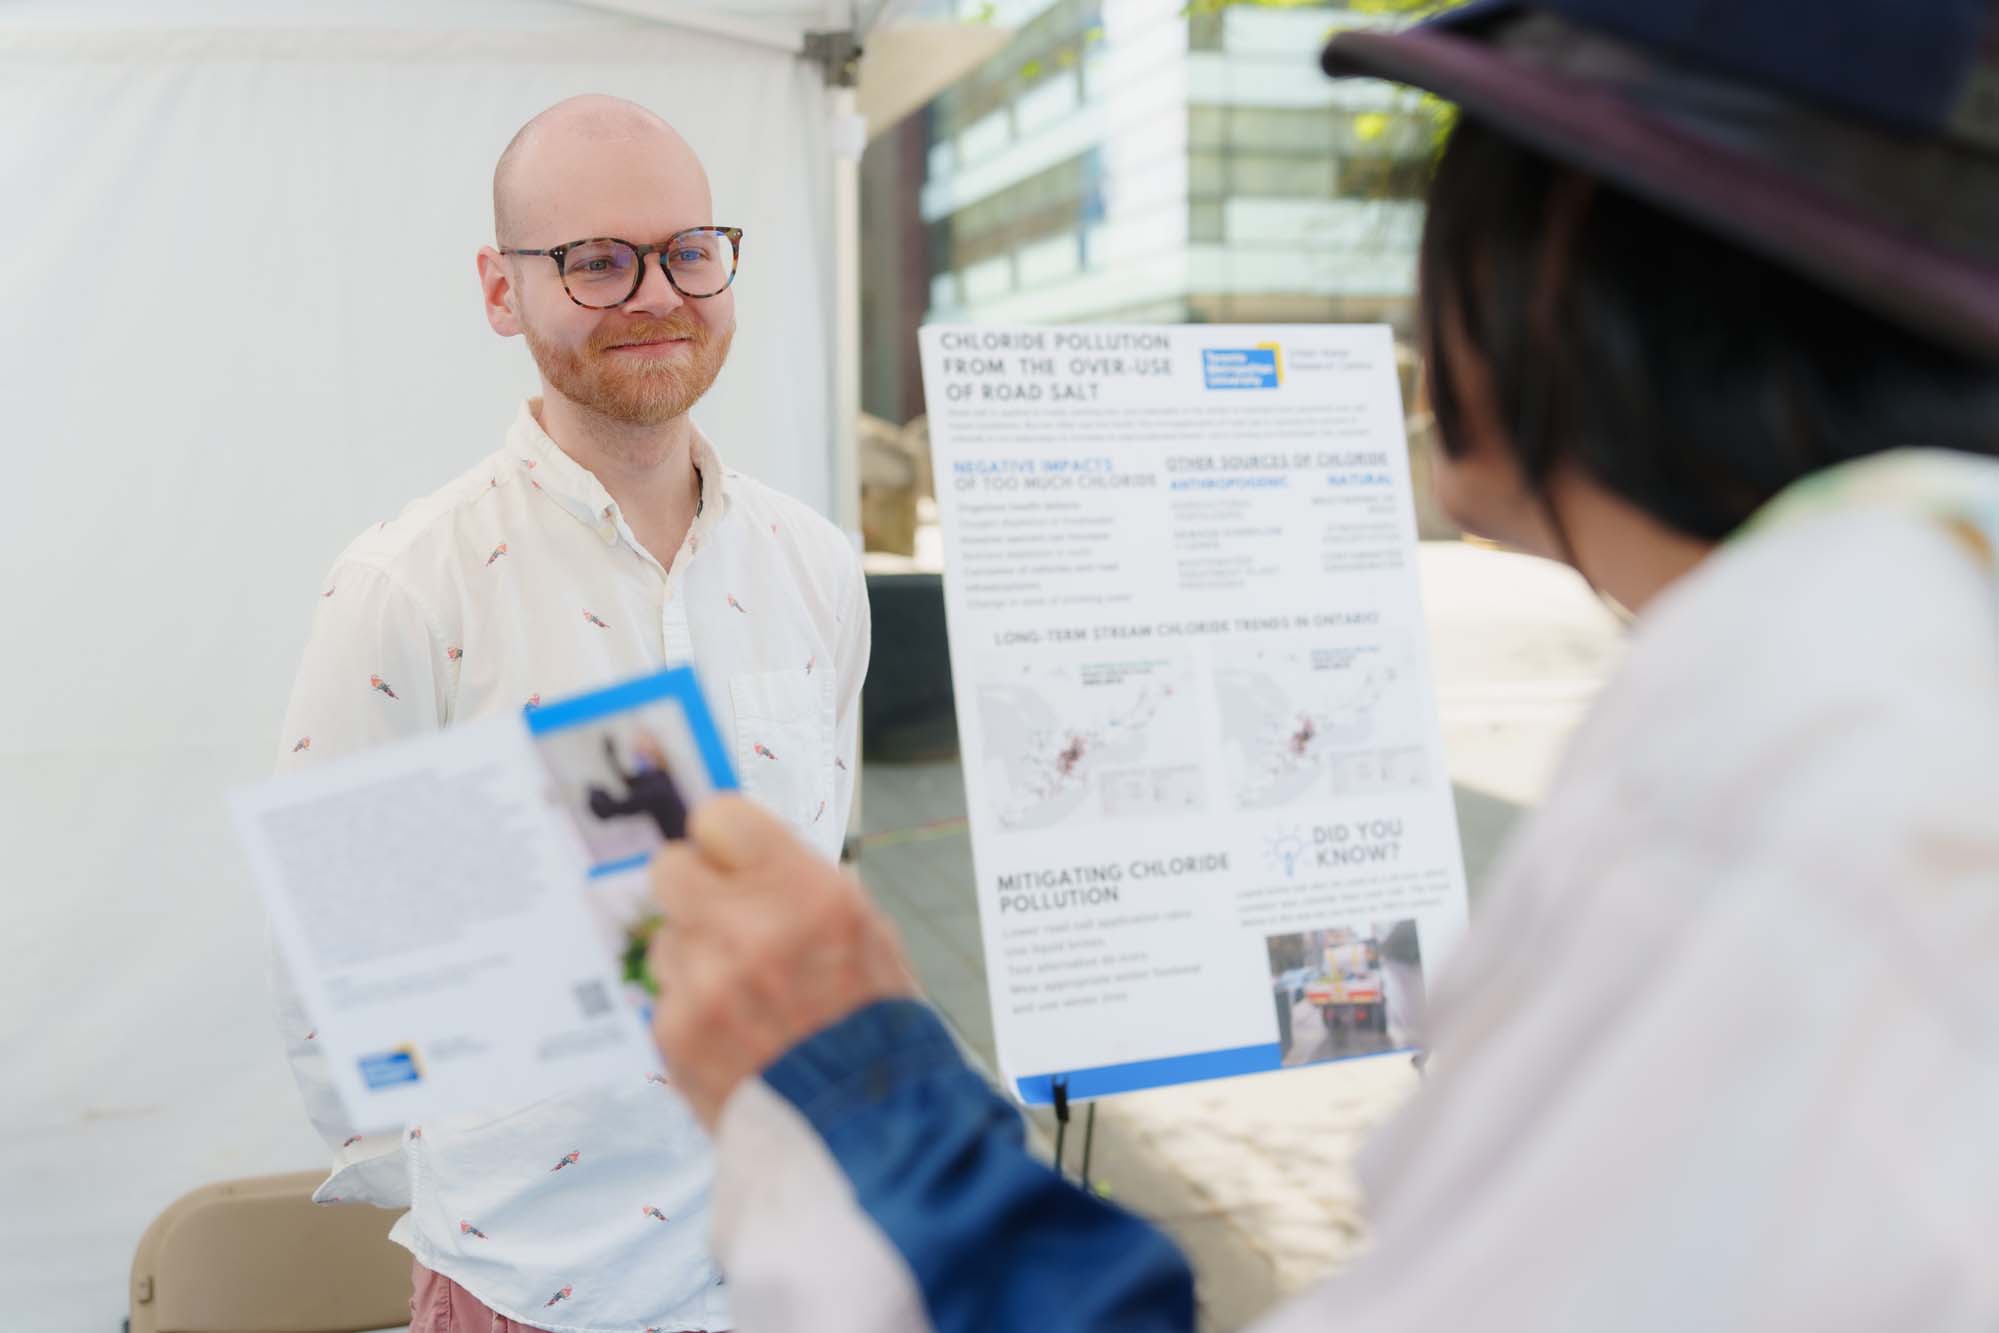 A volunteer standing next to a presentation board about chloride pollution from the over-use of road salt is listening to a participant at the TMU Urban Water booth. 